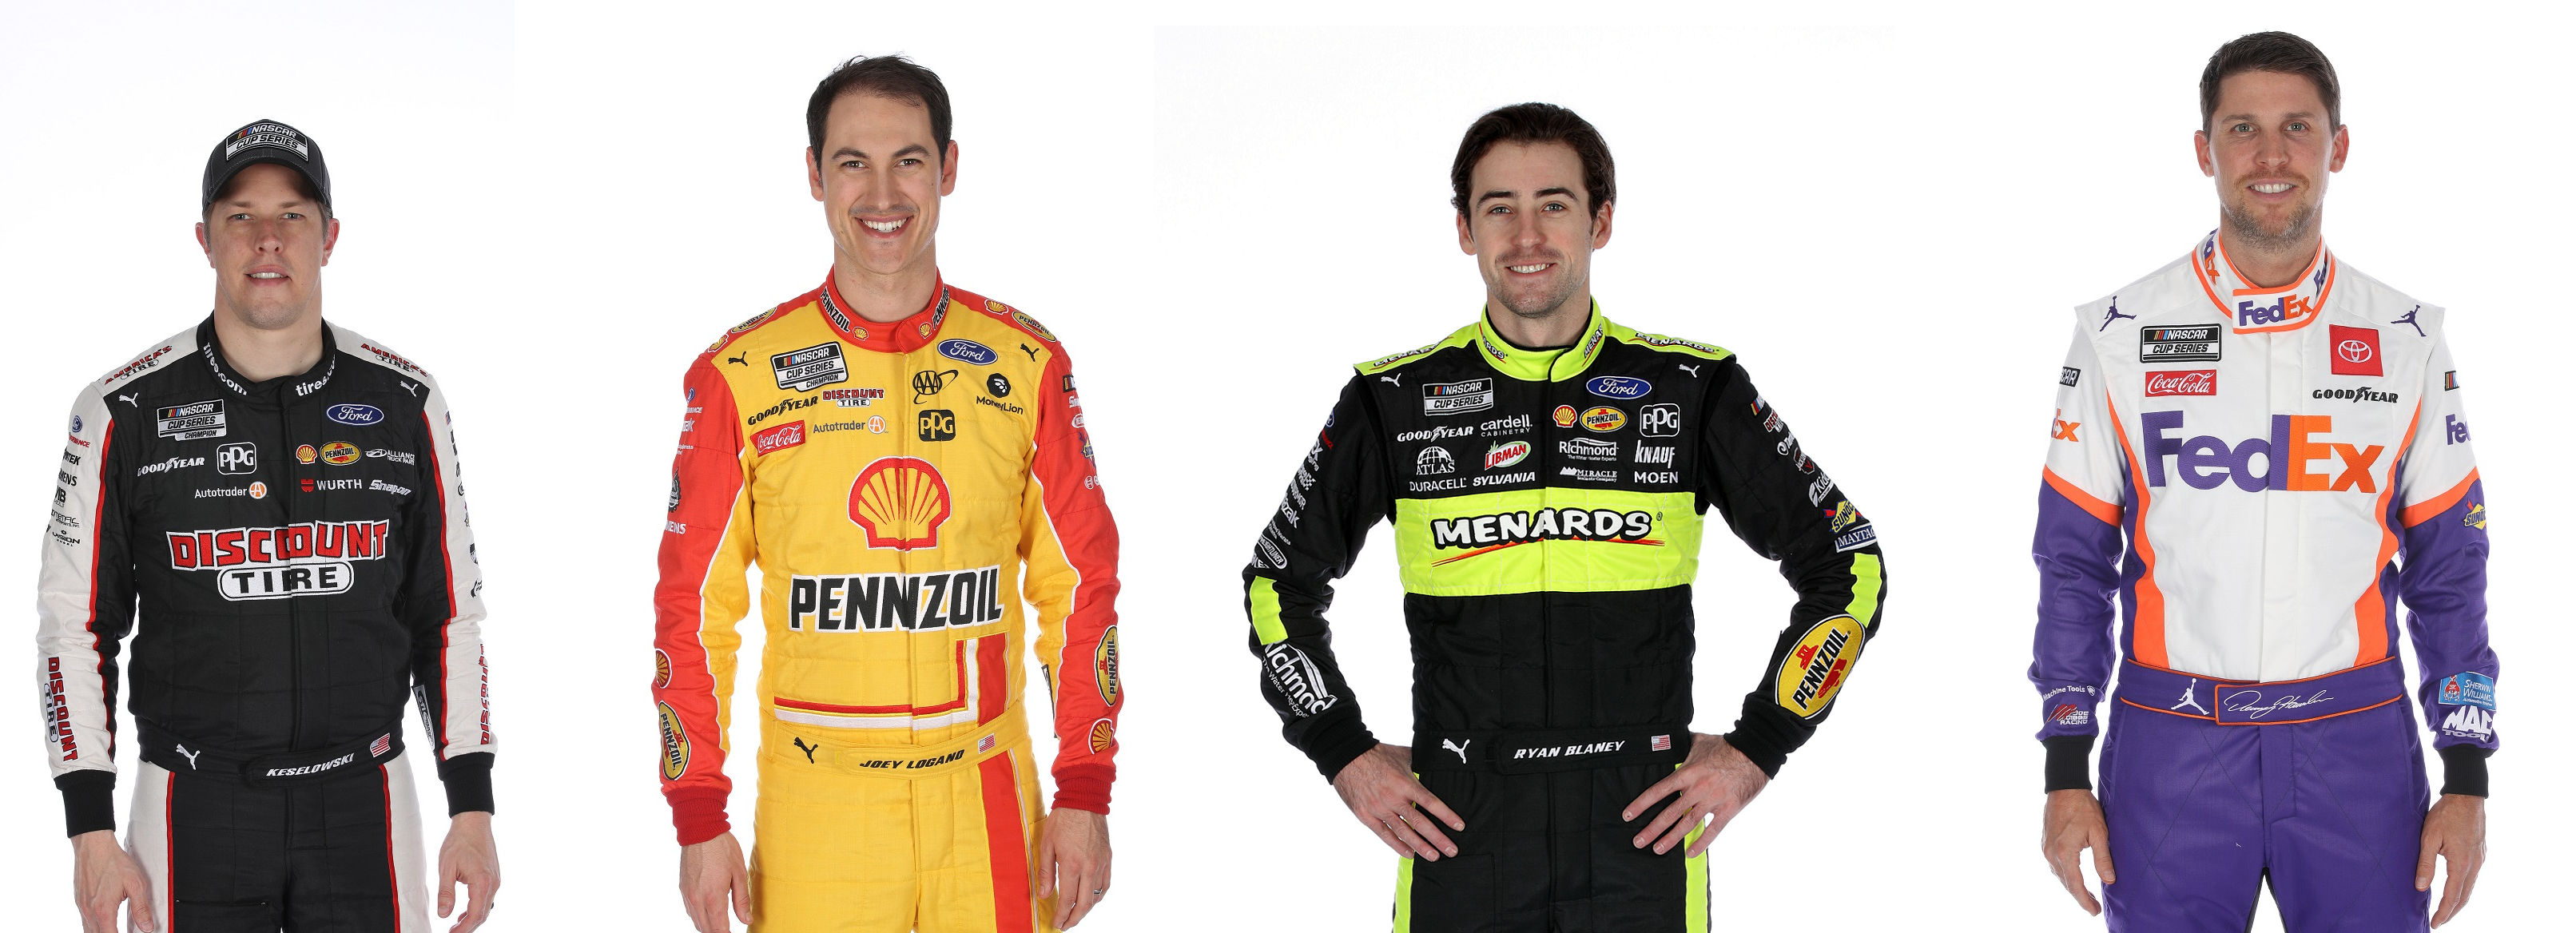 Goodness, just four race picks for New Hampshire?